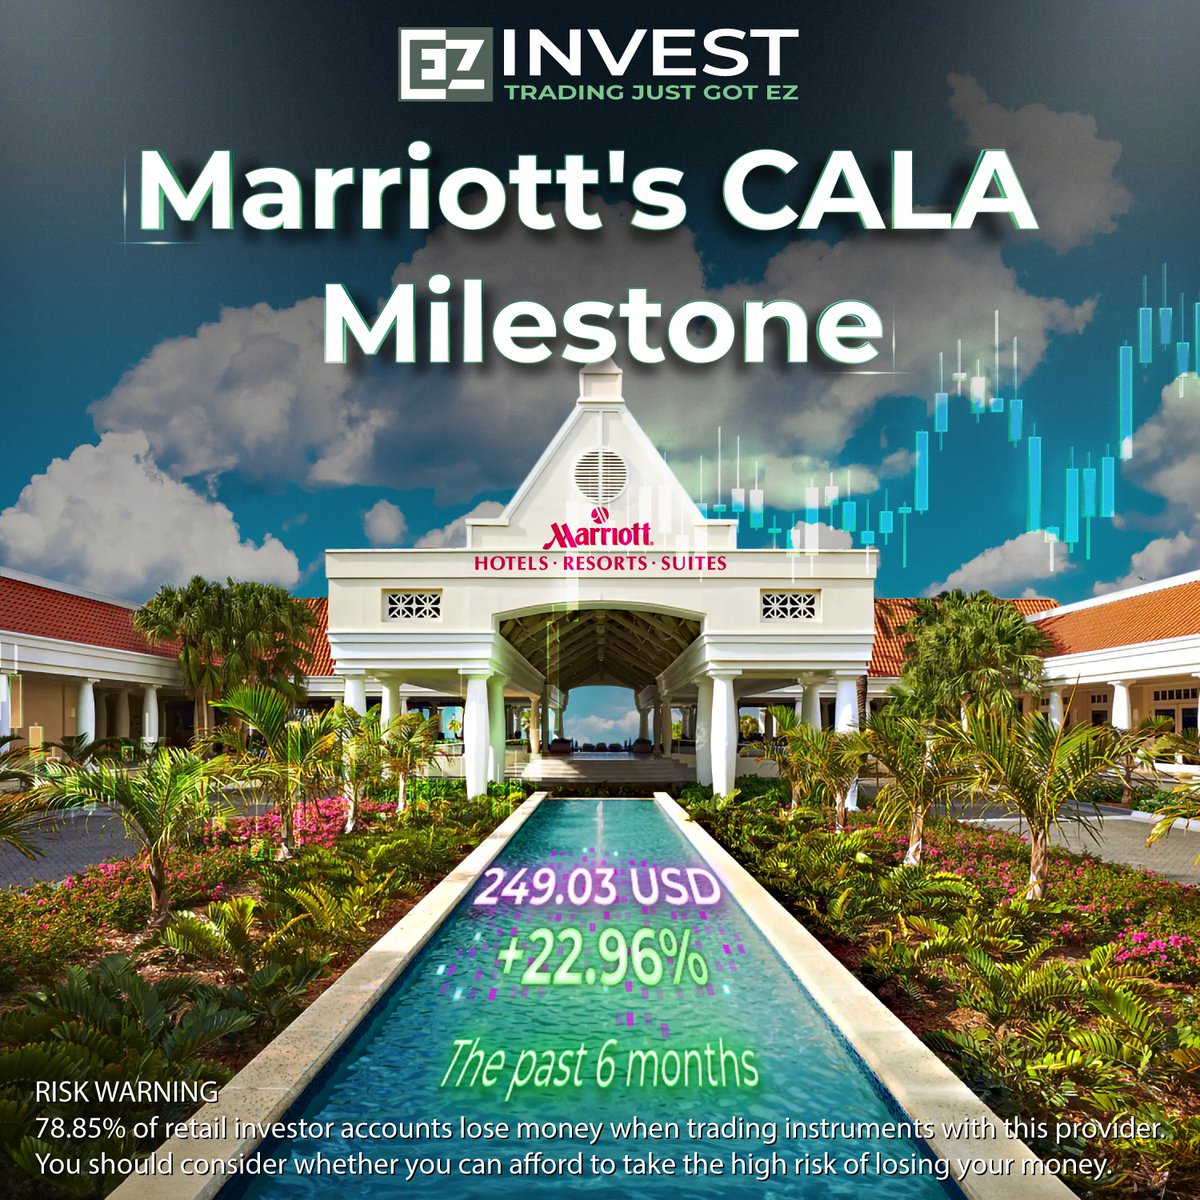 Marriott International reported significant growth in the Caribbean and Latin America region in 2023, with nearly double the number of deal signings compared to the previous year.

#NASDAQ #CALA #HotelGrowth #Hospitality #Stocks #Crypto #Commodities #Shares #BTC #ETH #XRP #Follow